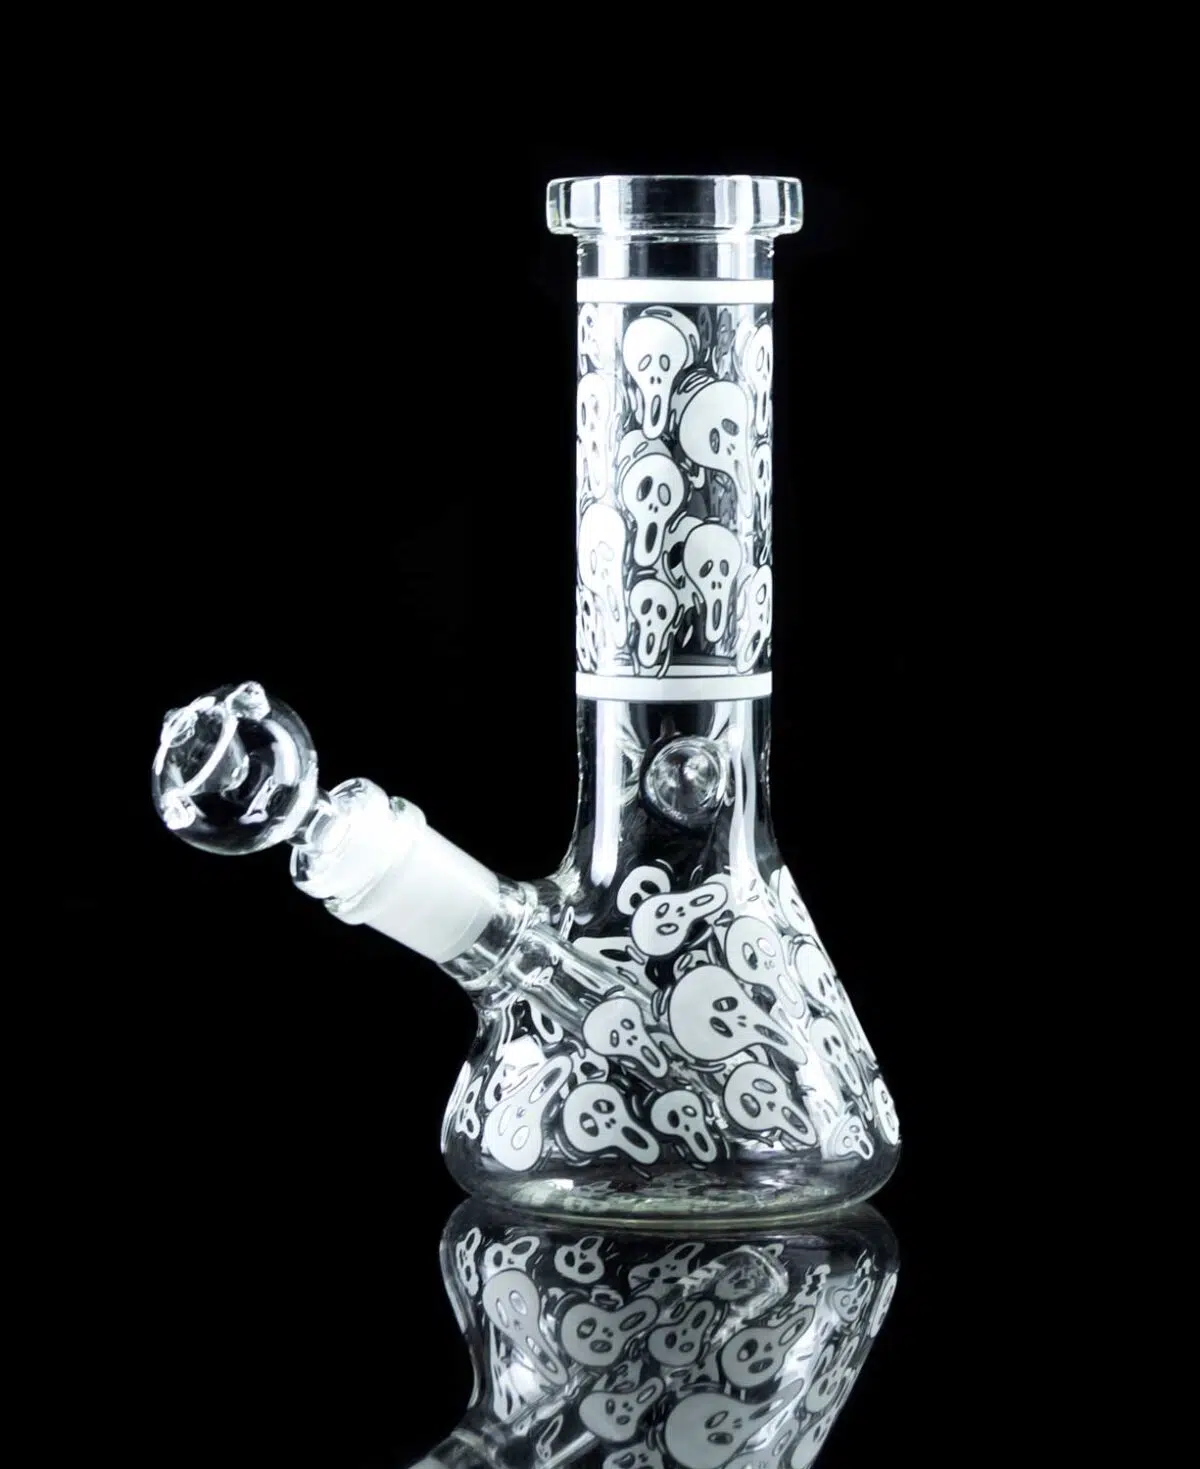 ghost face bong with big round bowl